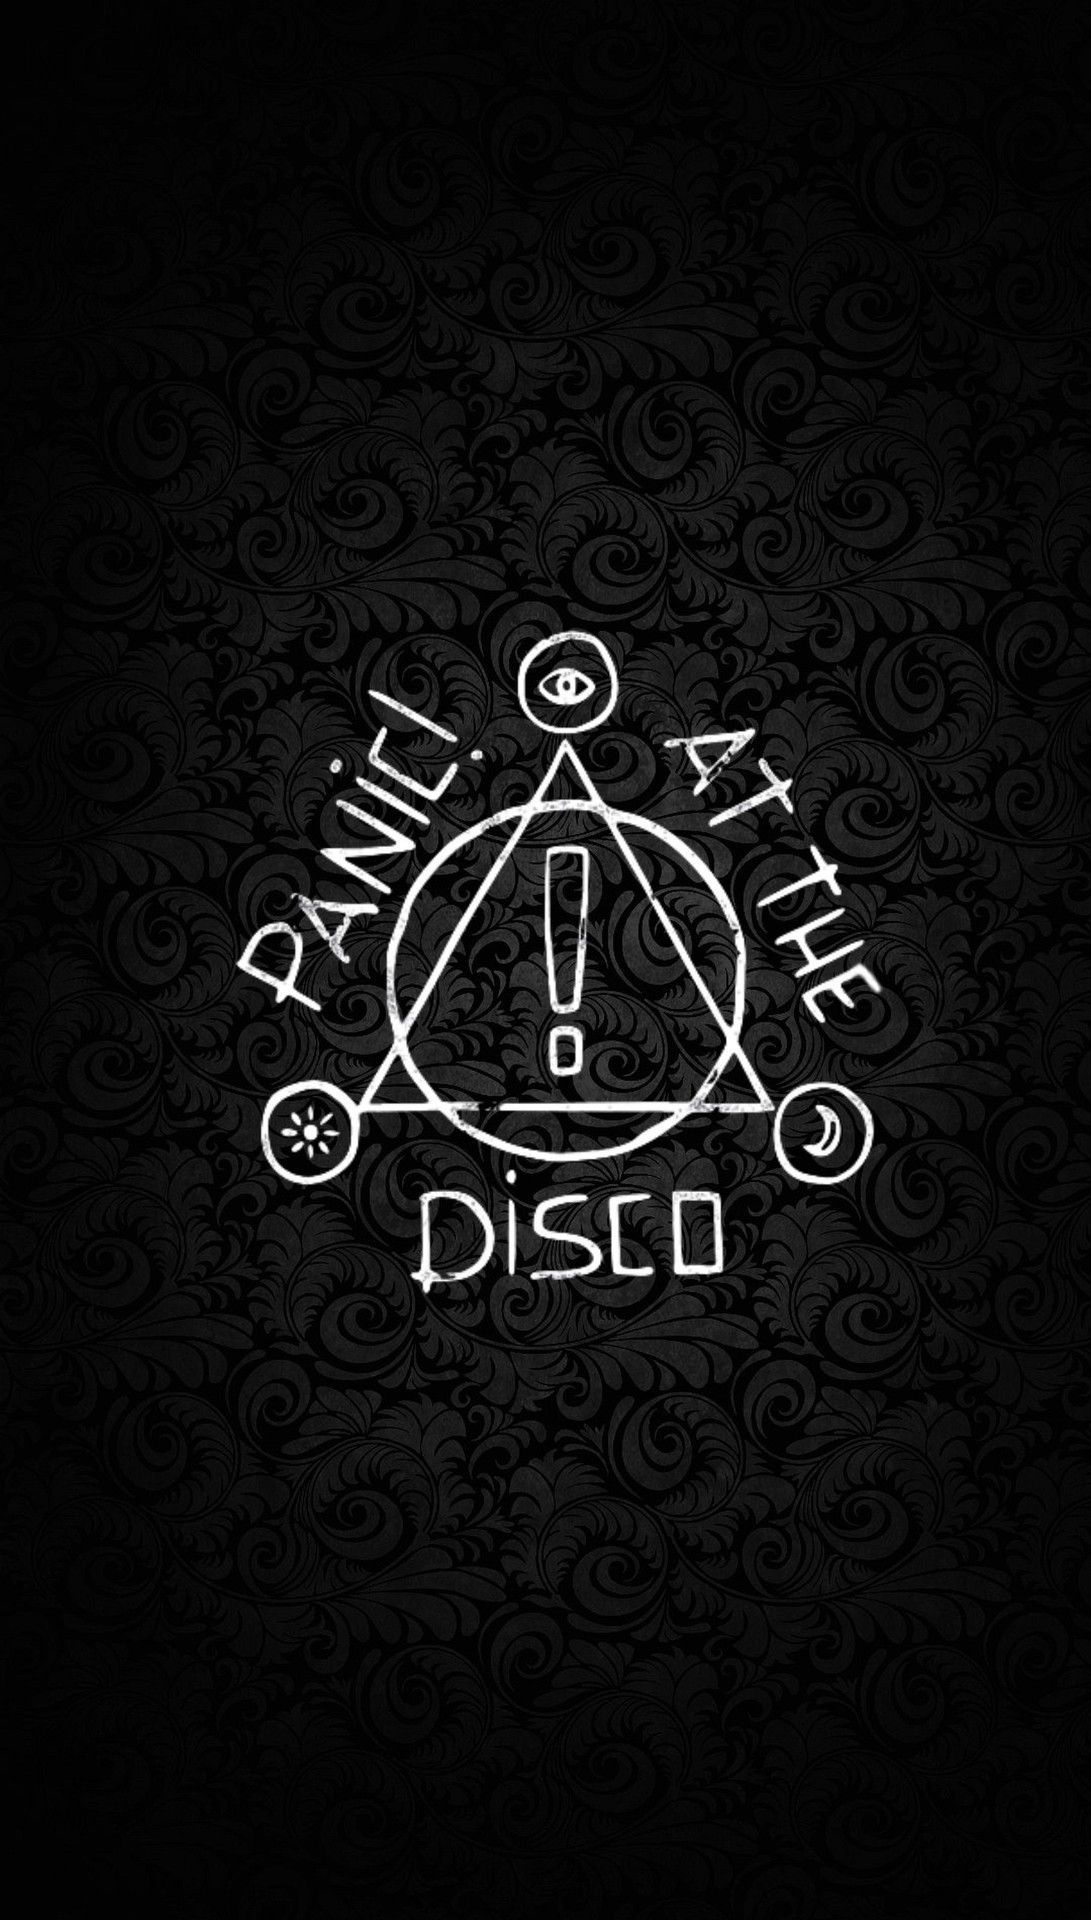 Band wallpaper image by Happy_Go_Loki_Fan on Panic!at the disco